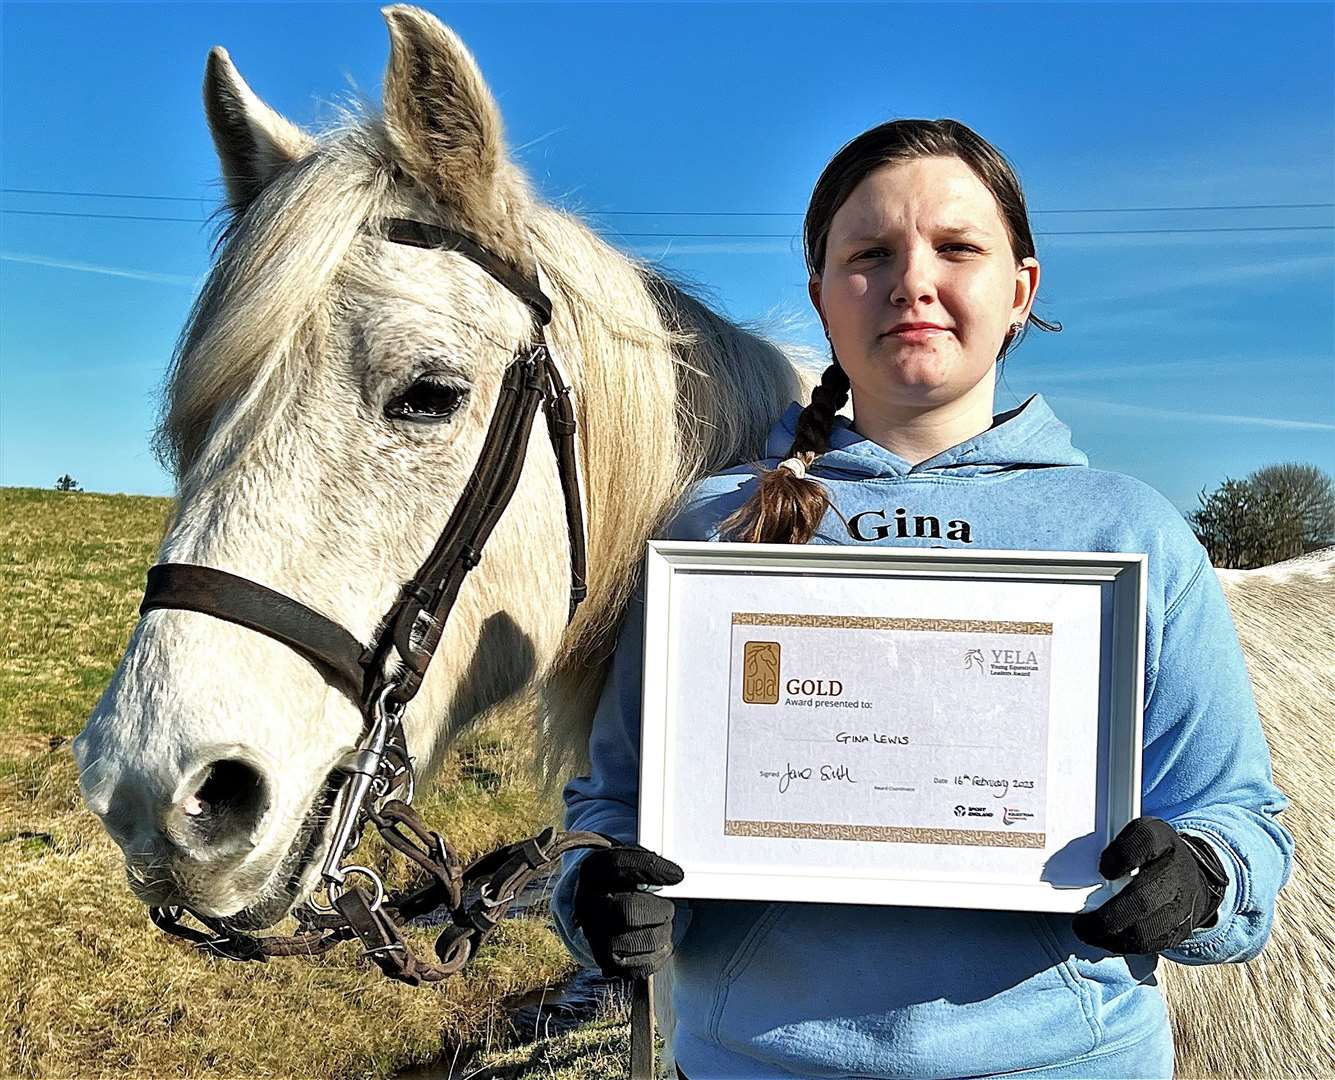 Gina with YELA gold award and Paris the horse. Gina has been invited to attend the 2023 YELA presentation.